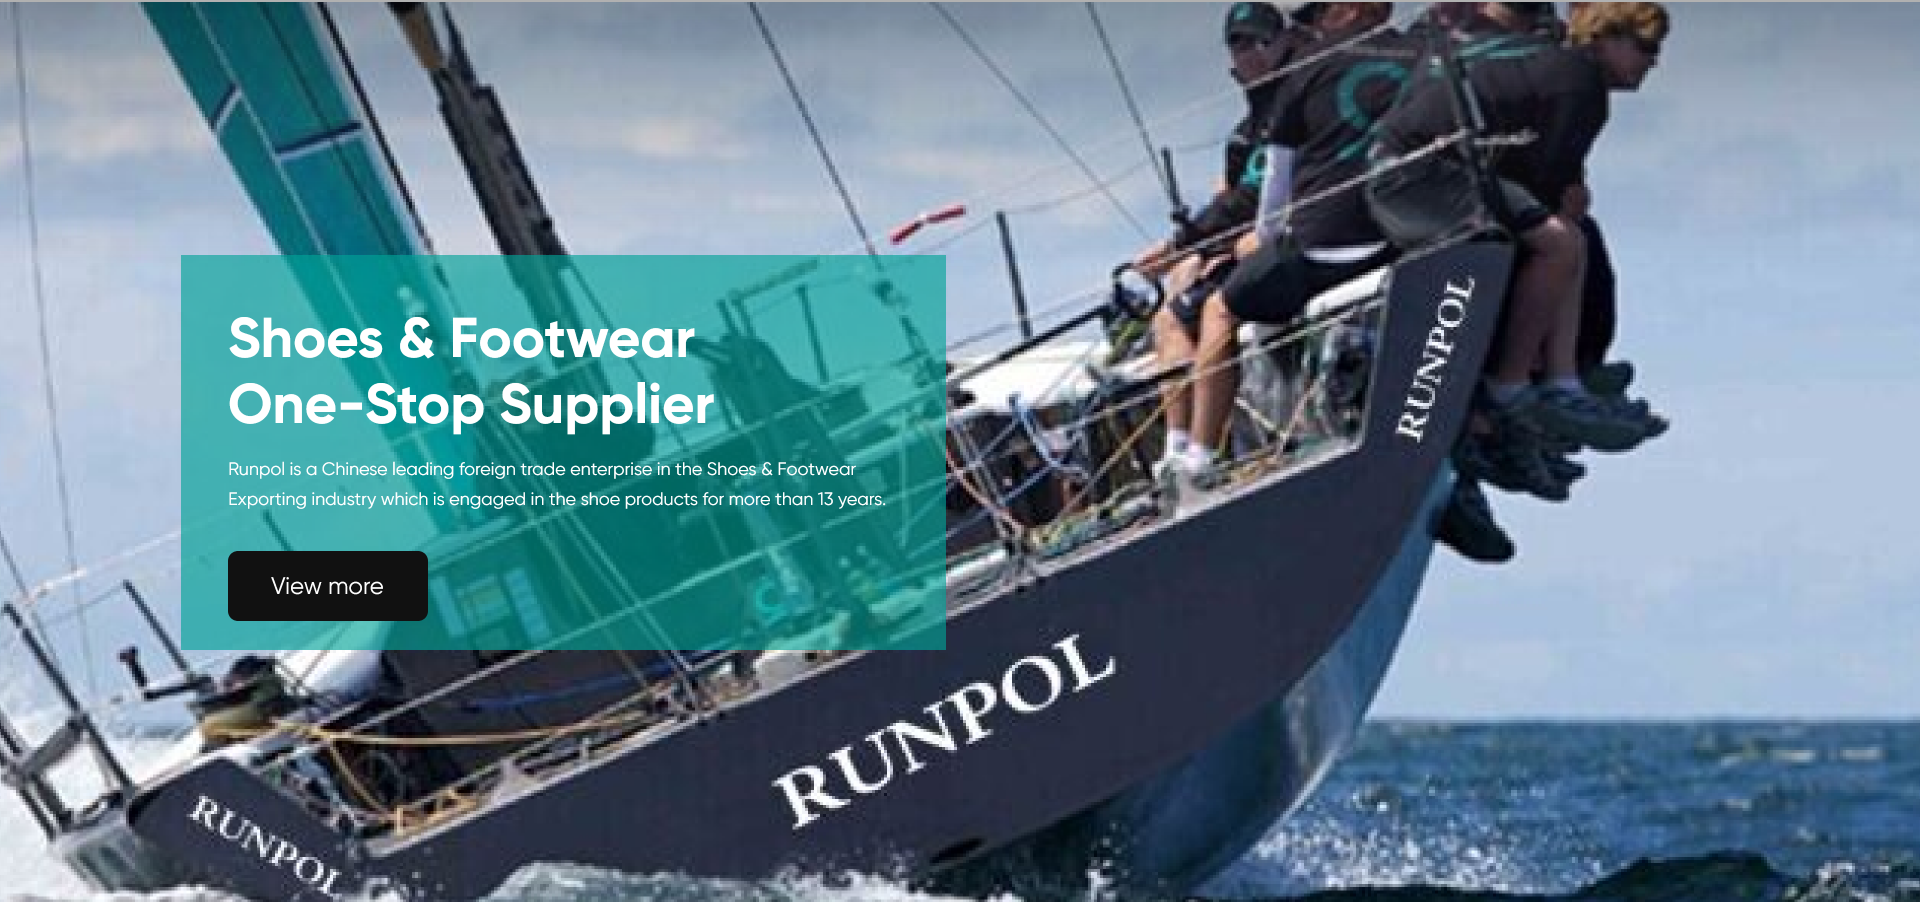 Shoes & Footwear One-Stop Supplier
Runpol is a Chinese leading foreign trade enterprise in the Shoes & FootwearExporting industry which is engaged in shoe products for more than 22 years.